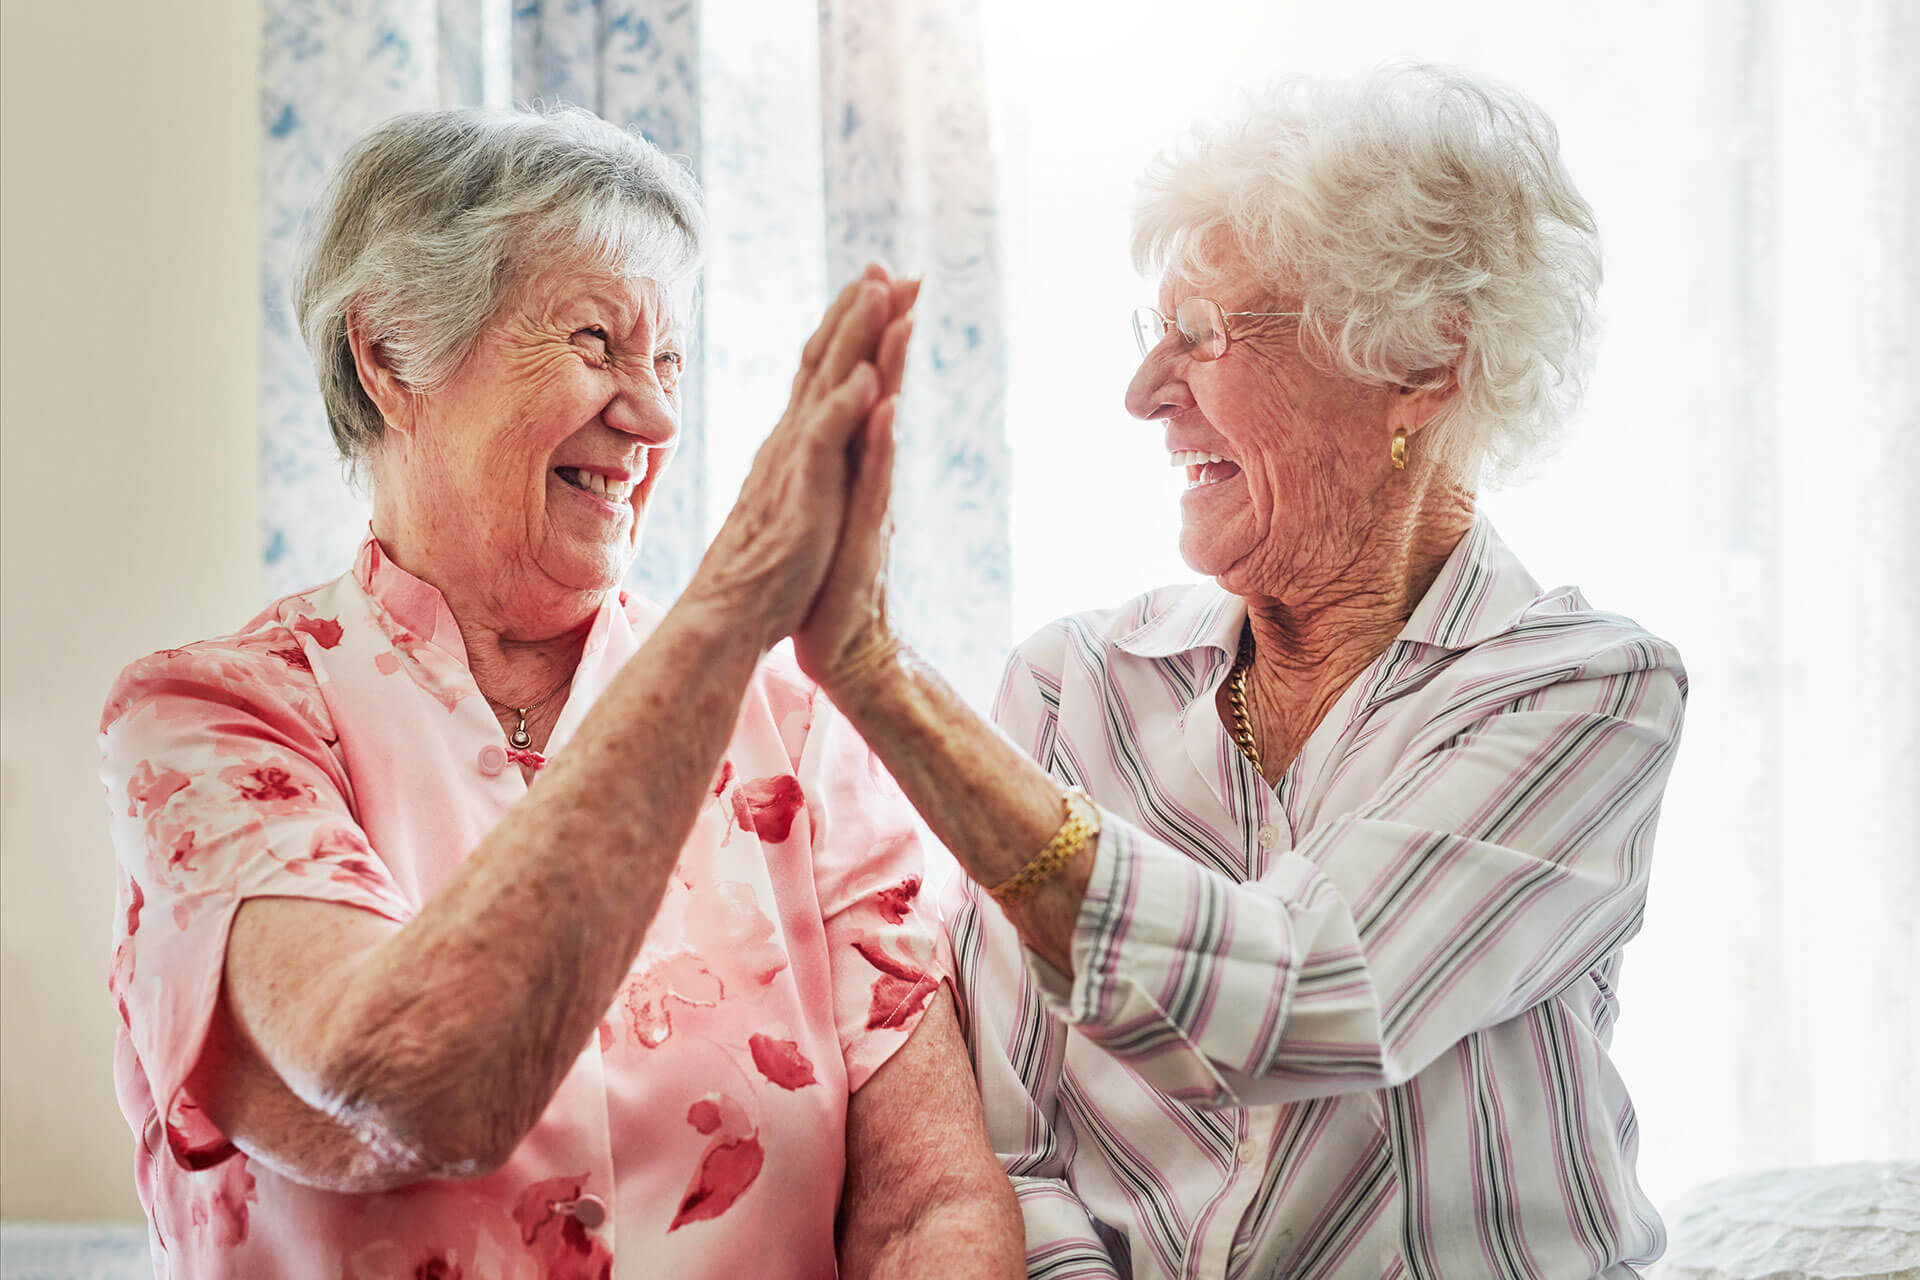 Two elderly women smiling and high-fiving in a bright room with floral curtains.